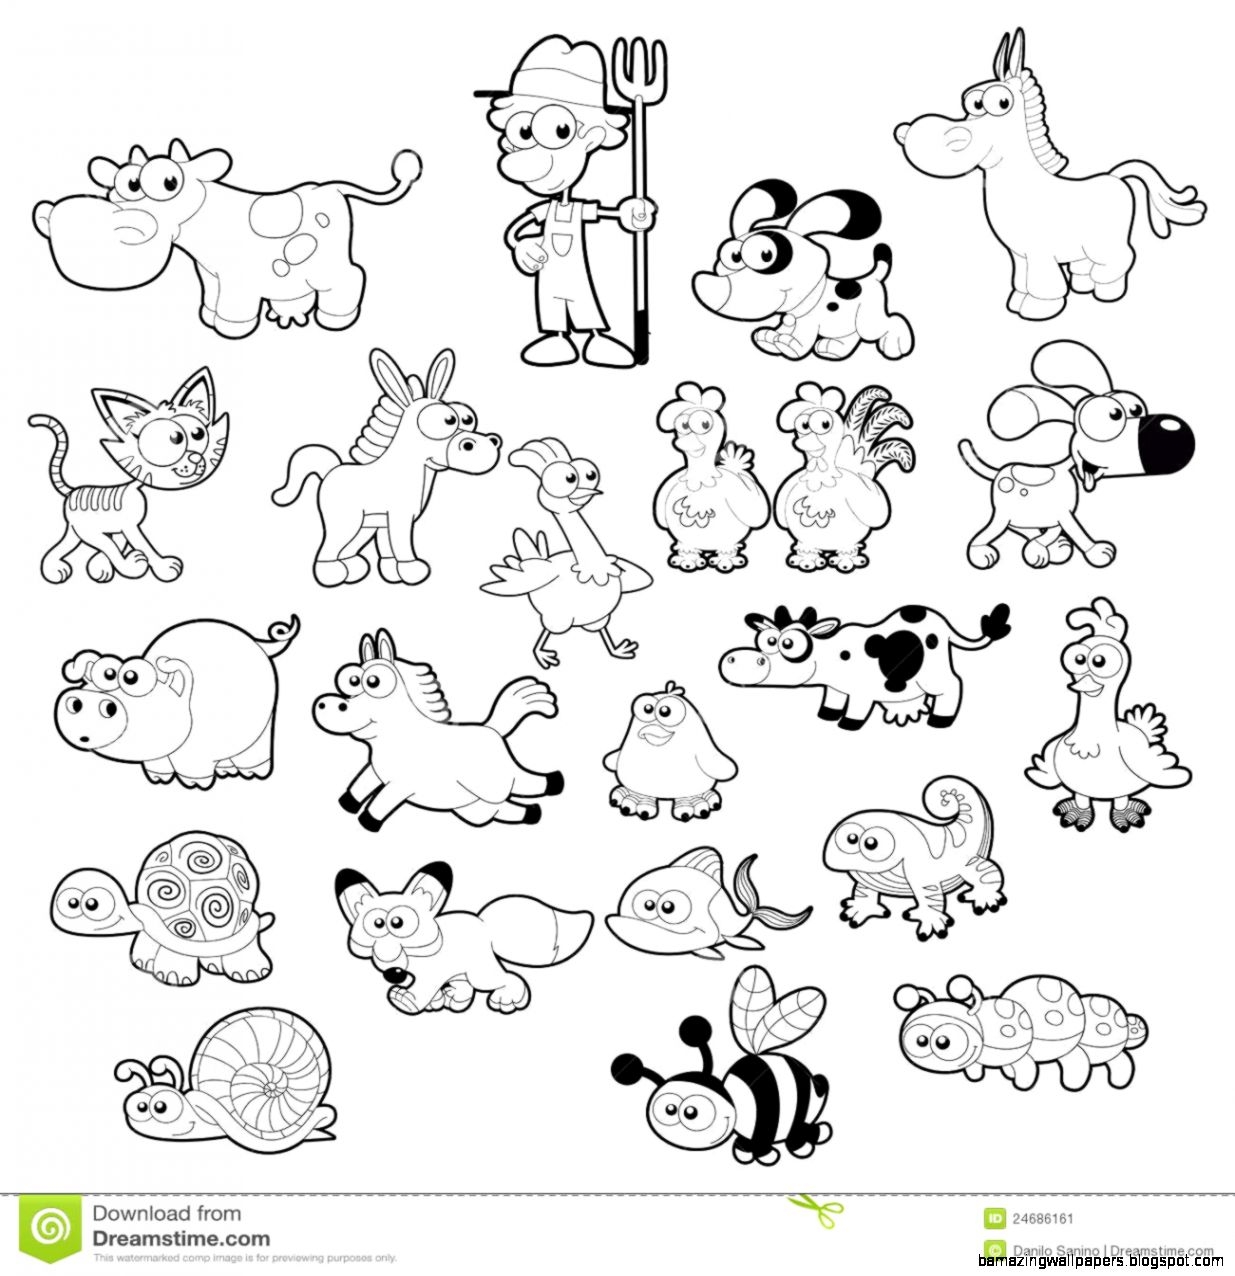 free black and white animal clipart